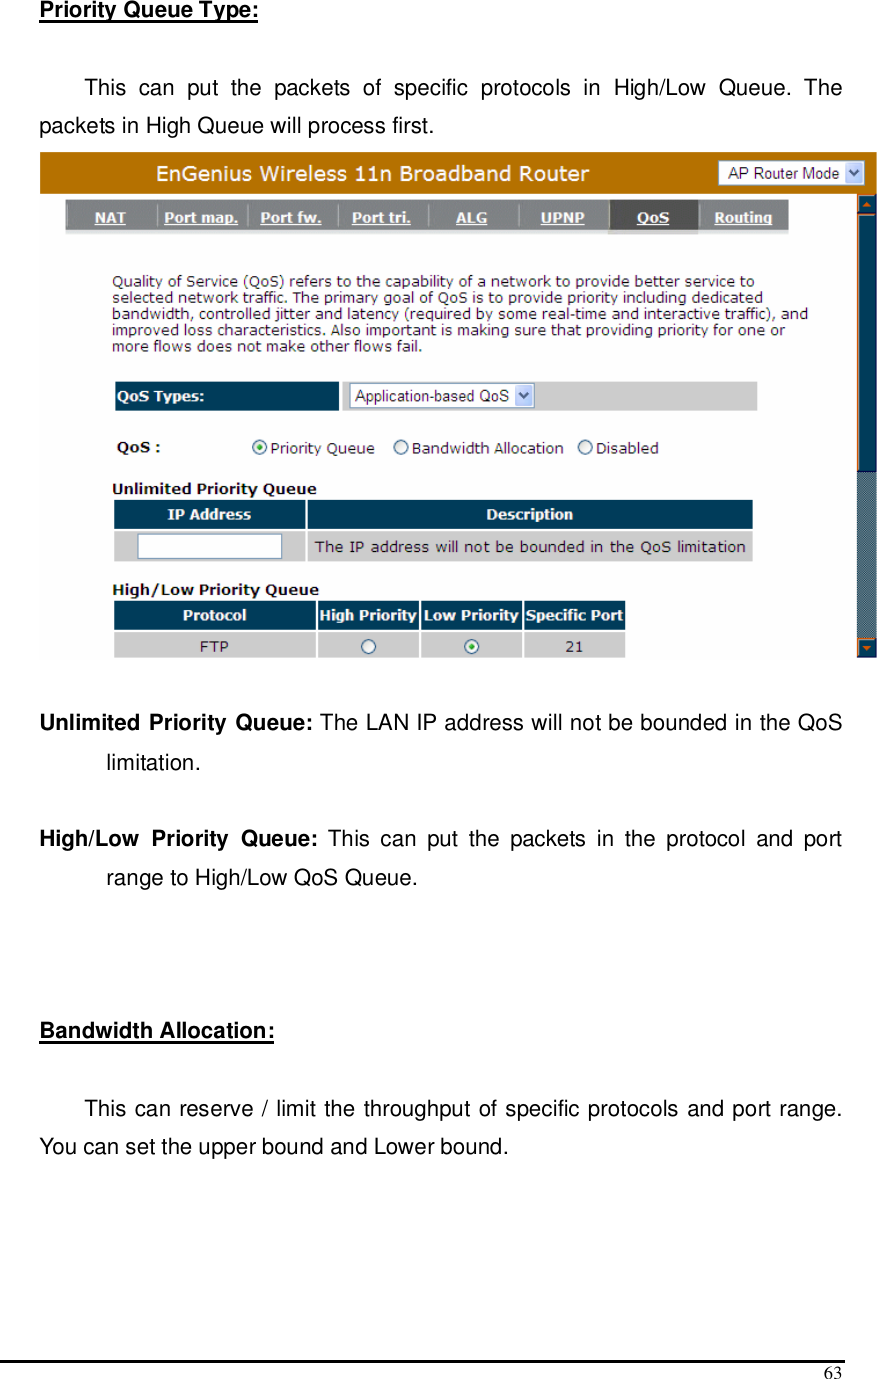  63 Priority Queue Type:   This  can  put  the  packets  of  specific  protocols  in  High/Low  Queue.  The packets in High Queue will process first.   Unlimited Priority Queue: The LAN IP address will not be bounded in the QoS limitation.  High/Low  Priority  Queue:  This  can  put  the  packets  in  the  protocol  and  port range to High/Low QoS Queue.    Bandwidth Allocation:   This can reserve / limit the throughput of specific protocols and port range. You can set the upper bound and Lower bound.  